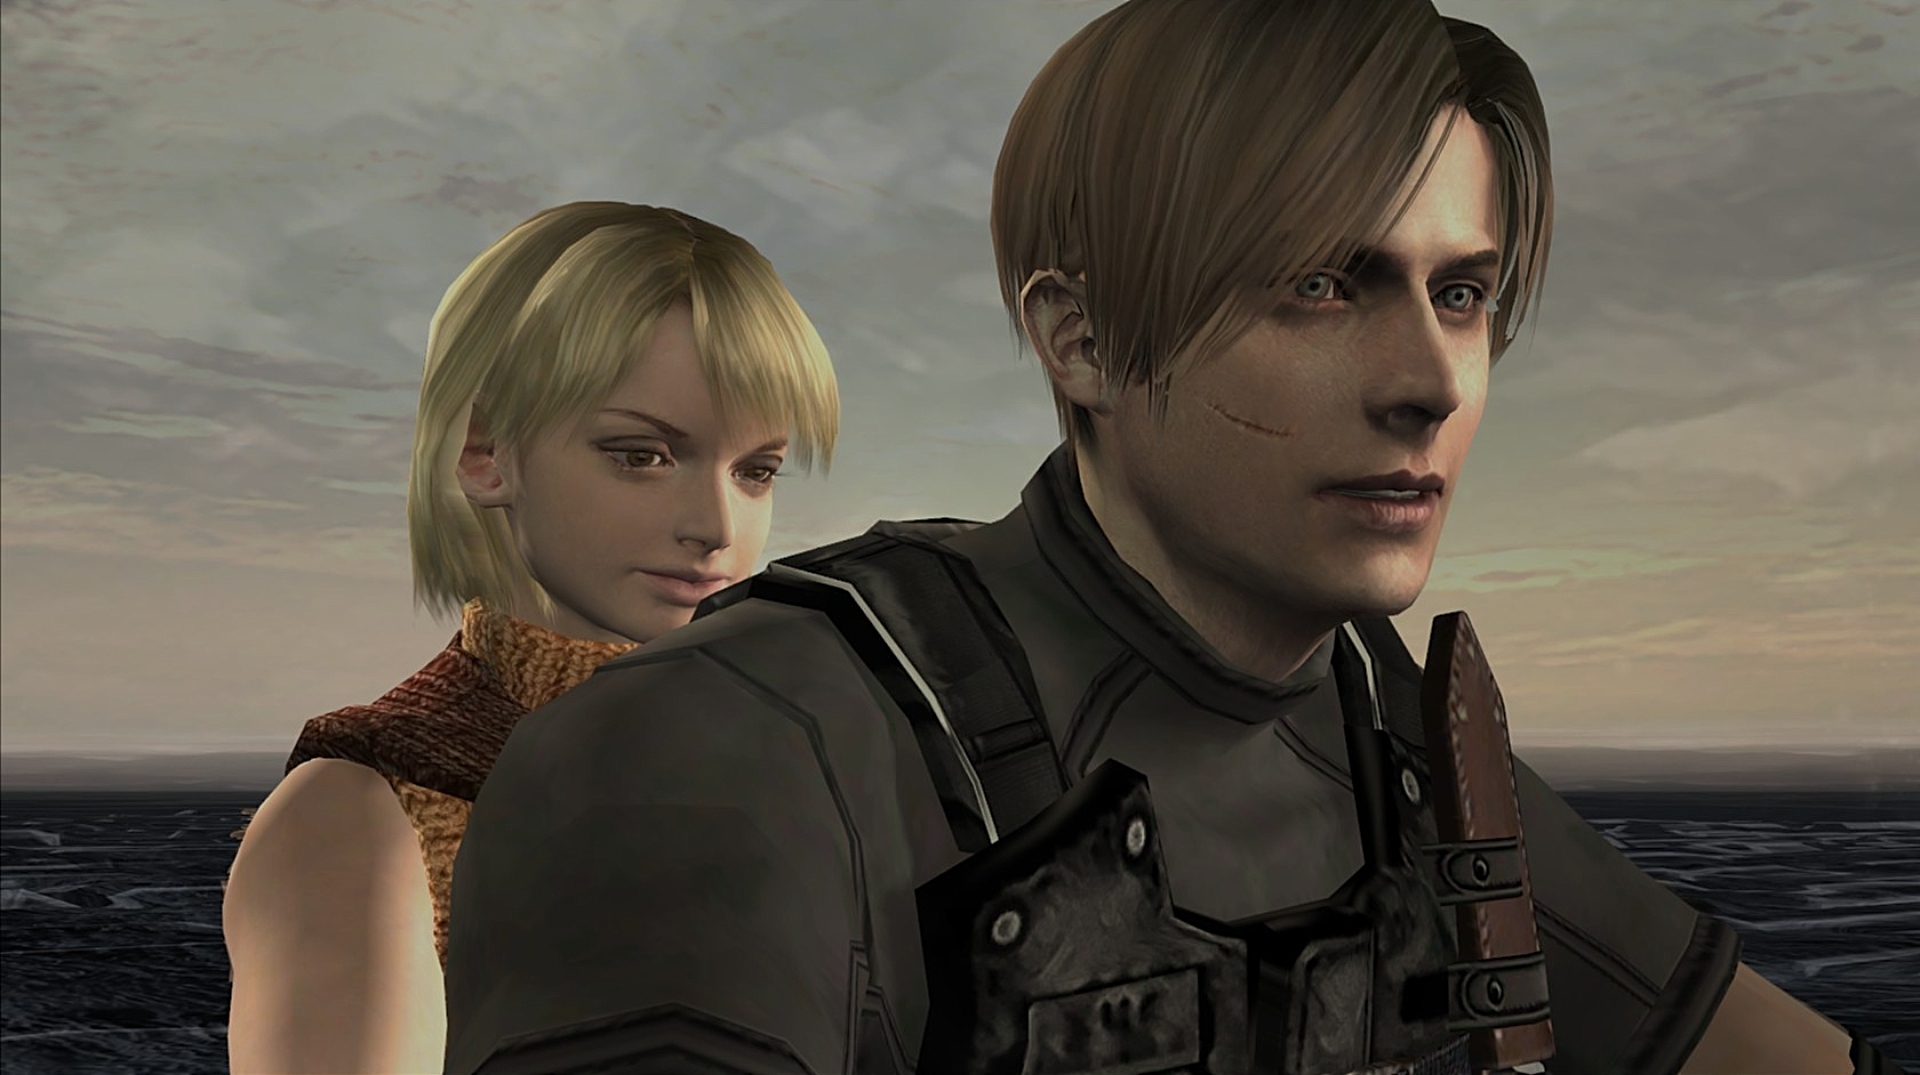 leon s. kennedy, ashley graham, and luis sera (resident evil and 2 more)